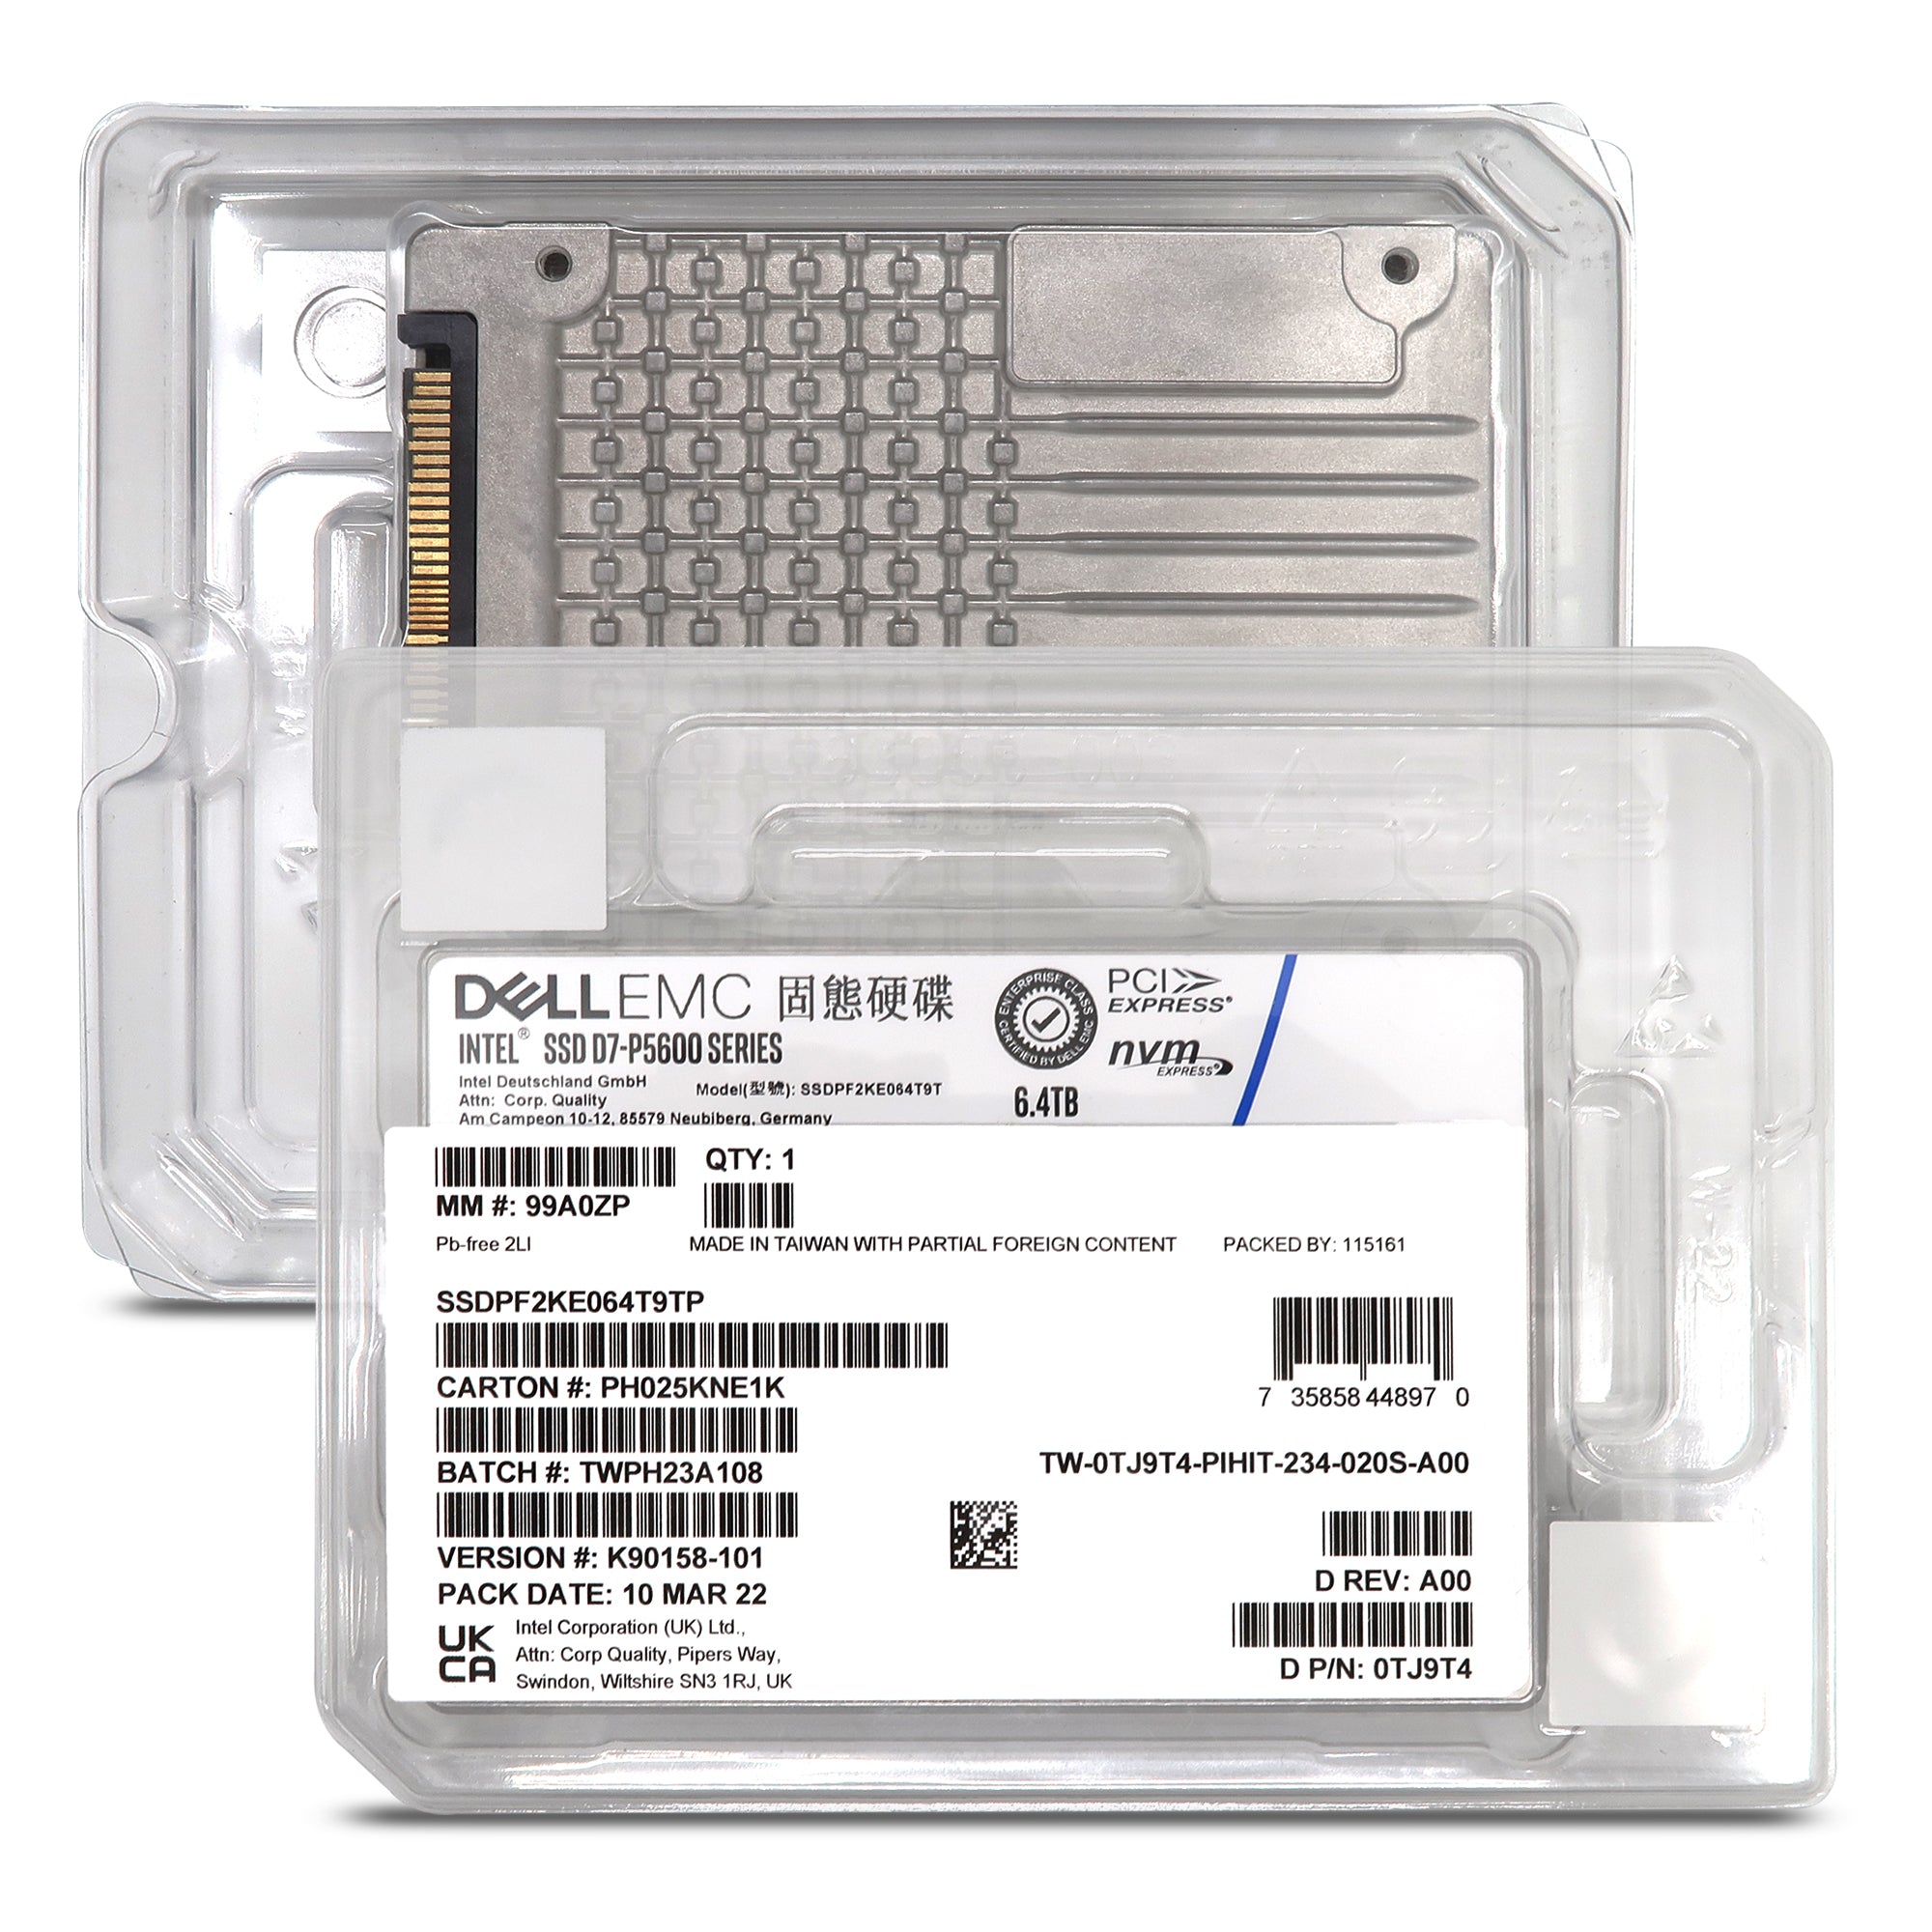 Dell D7-P5600 SSDPF2KE064T9TP 0TJ9T4 6.4TB PCIe Gen 4.0 x4 8GB/s 3D TLC 3DWPD SED U.2 NVMe 2.5in Solid State Drive - Factory Sealed New